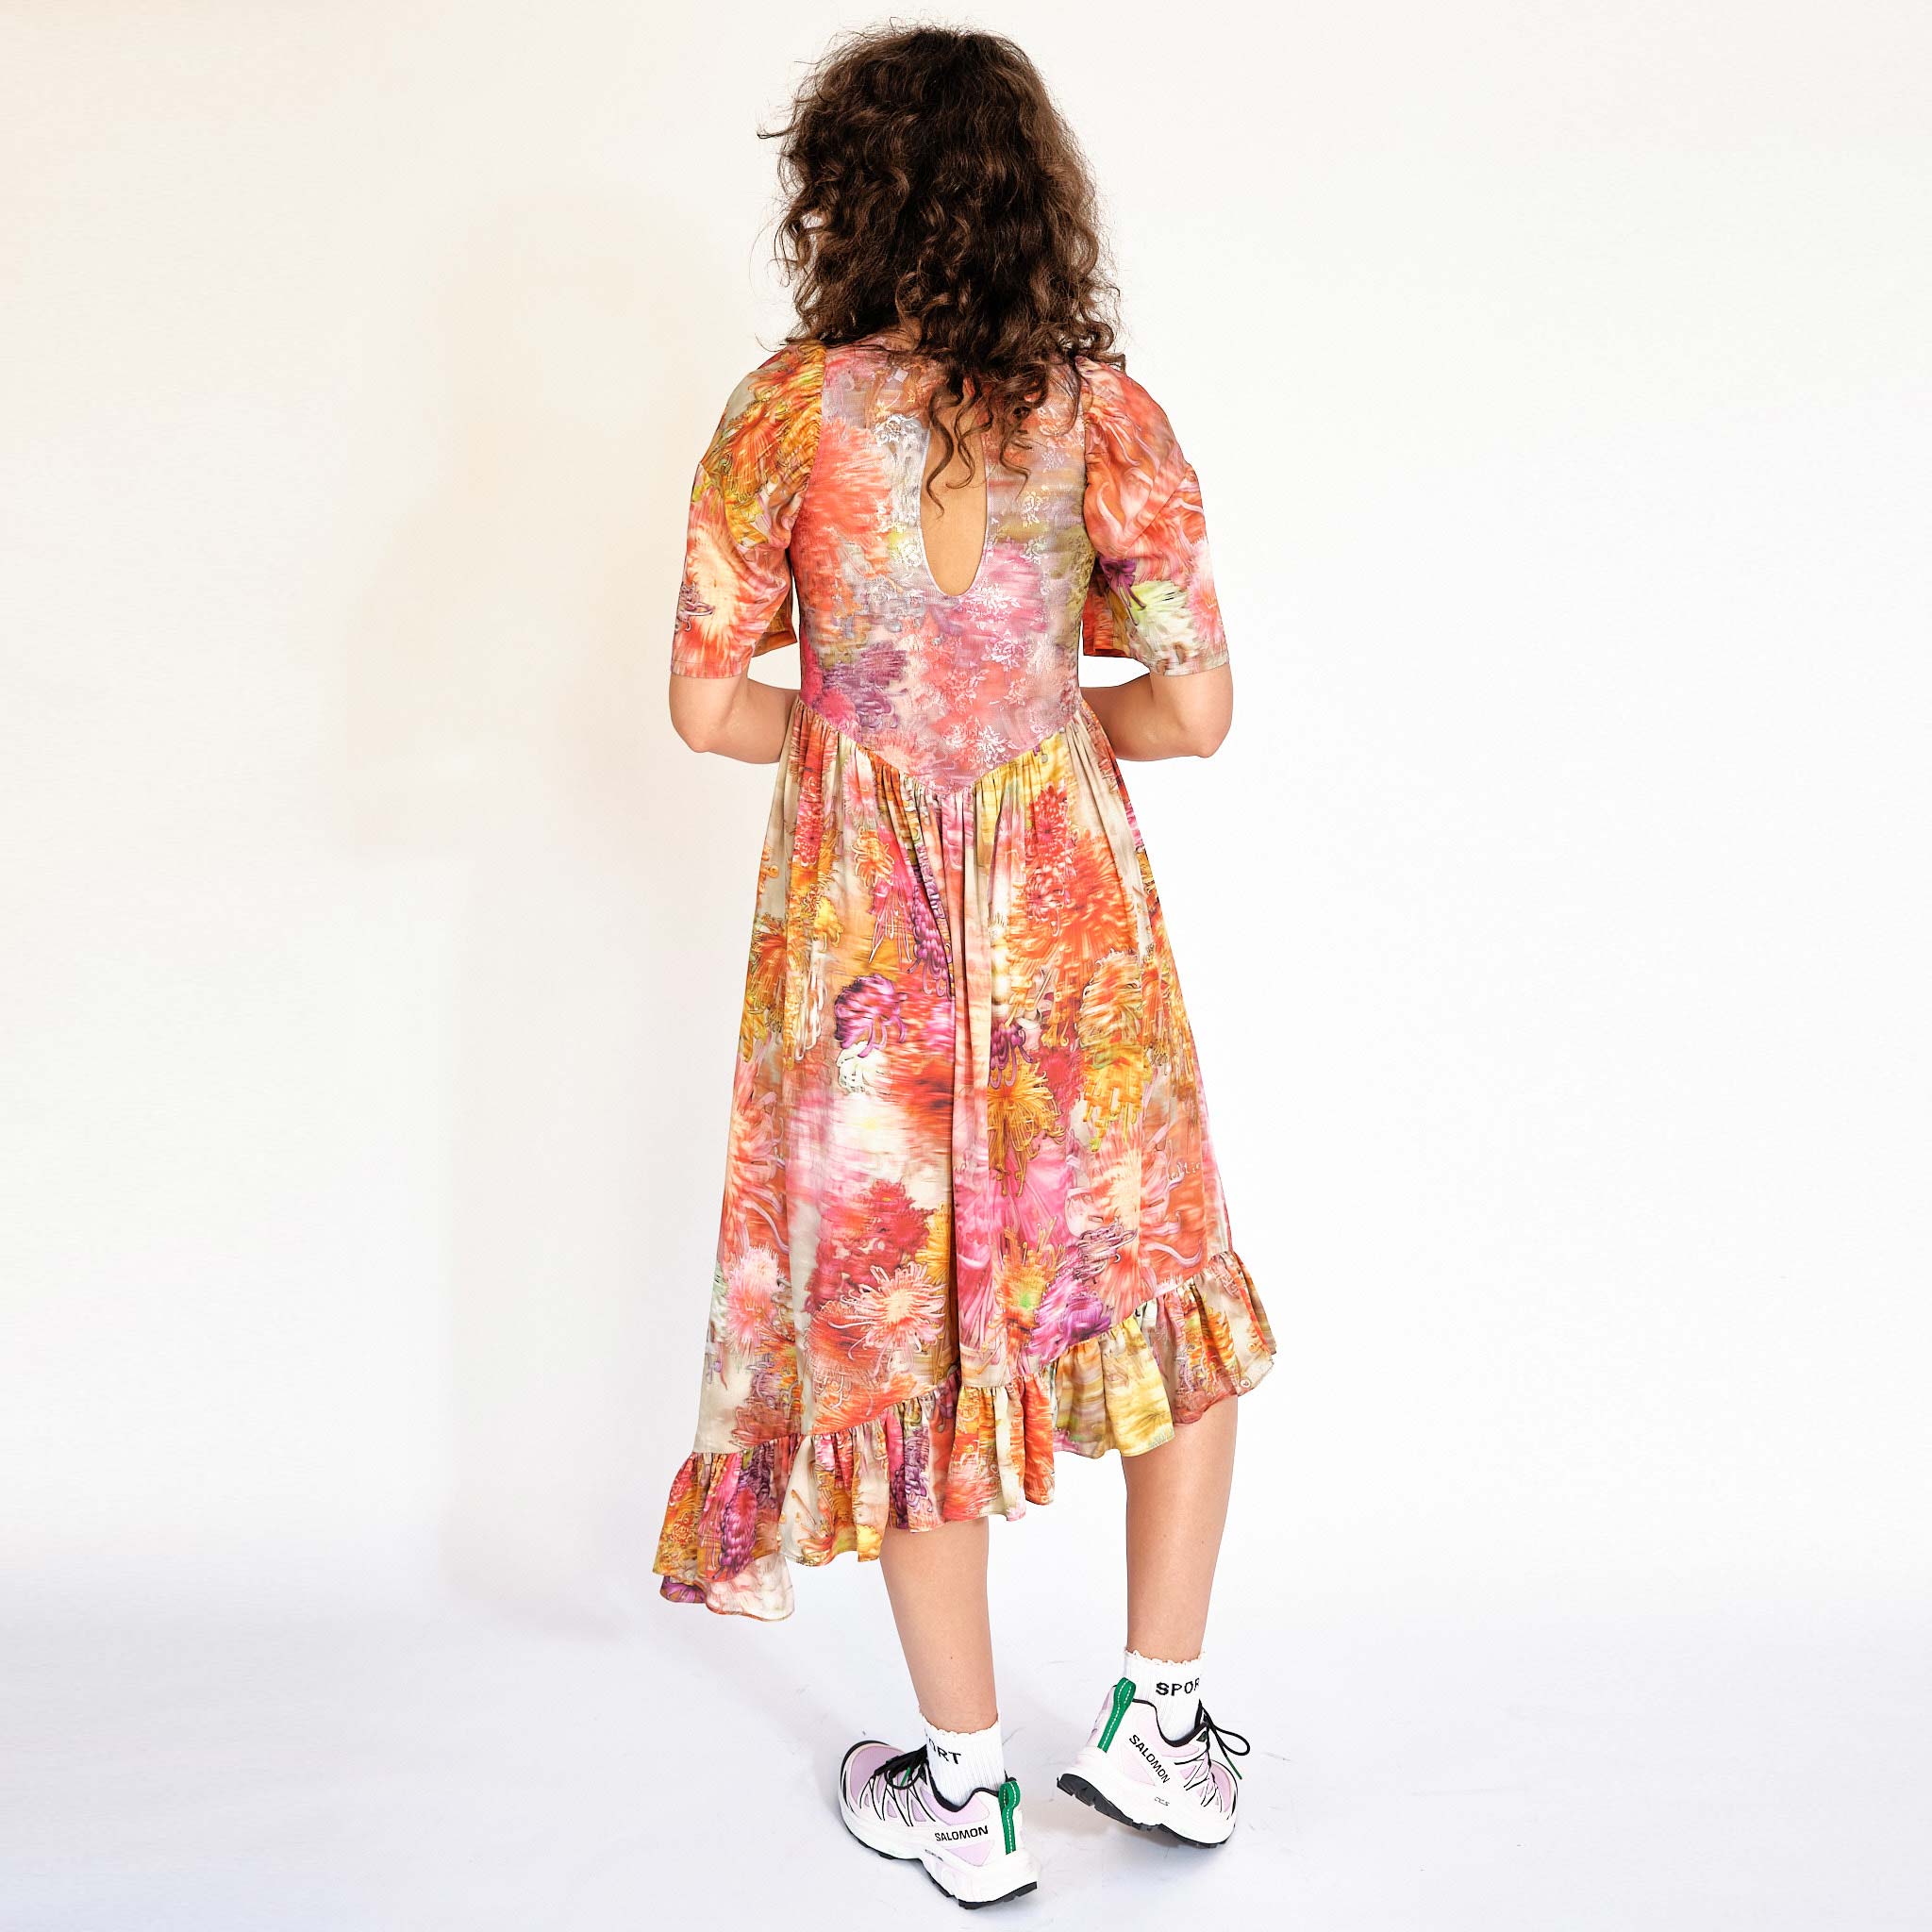 A model wears the Pollinate Dress in Chrysanthemum - multicolored floral dress with short bell sleeves and an asymmetrical ruffled hem - back view.